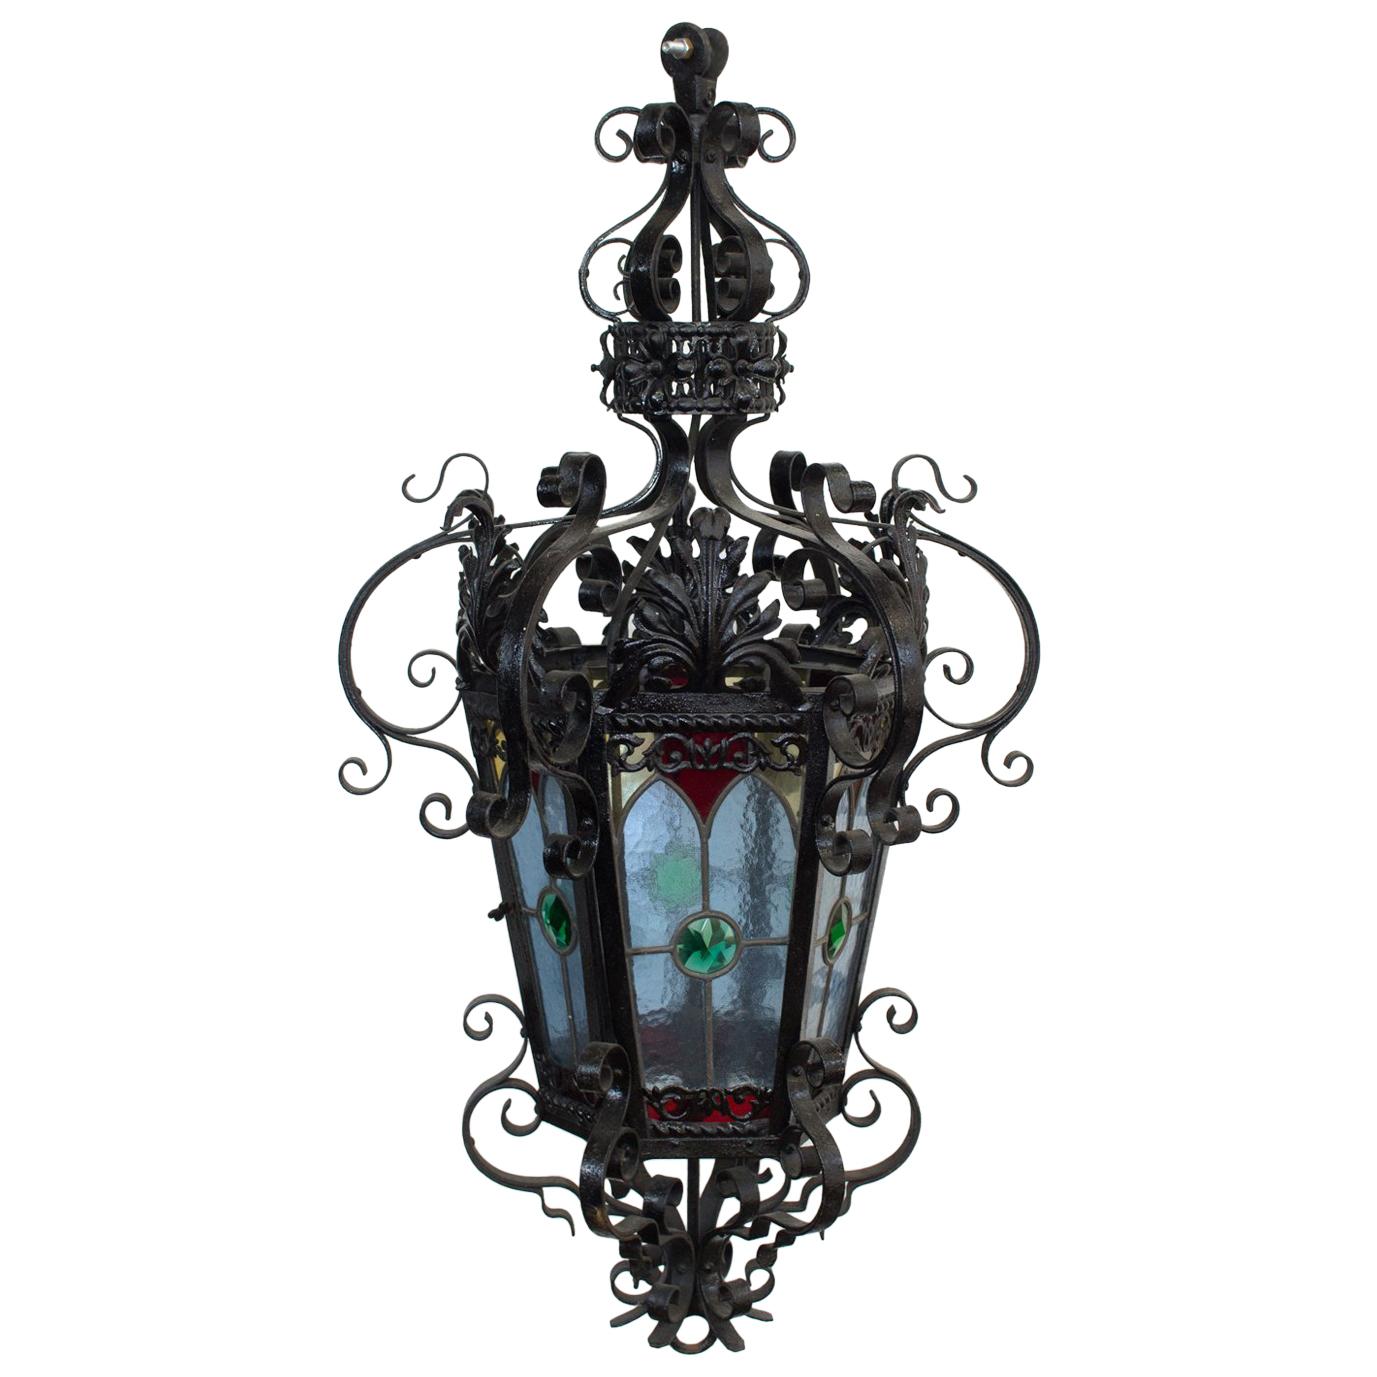 Antique Stained Glass Wrought Iron Lantern